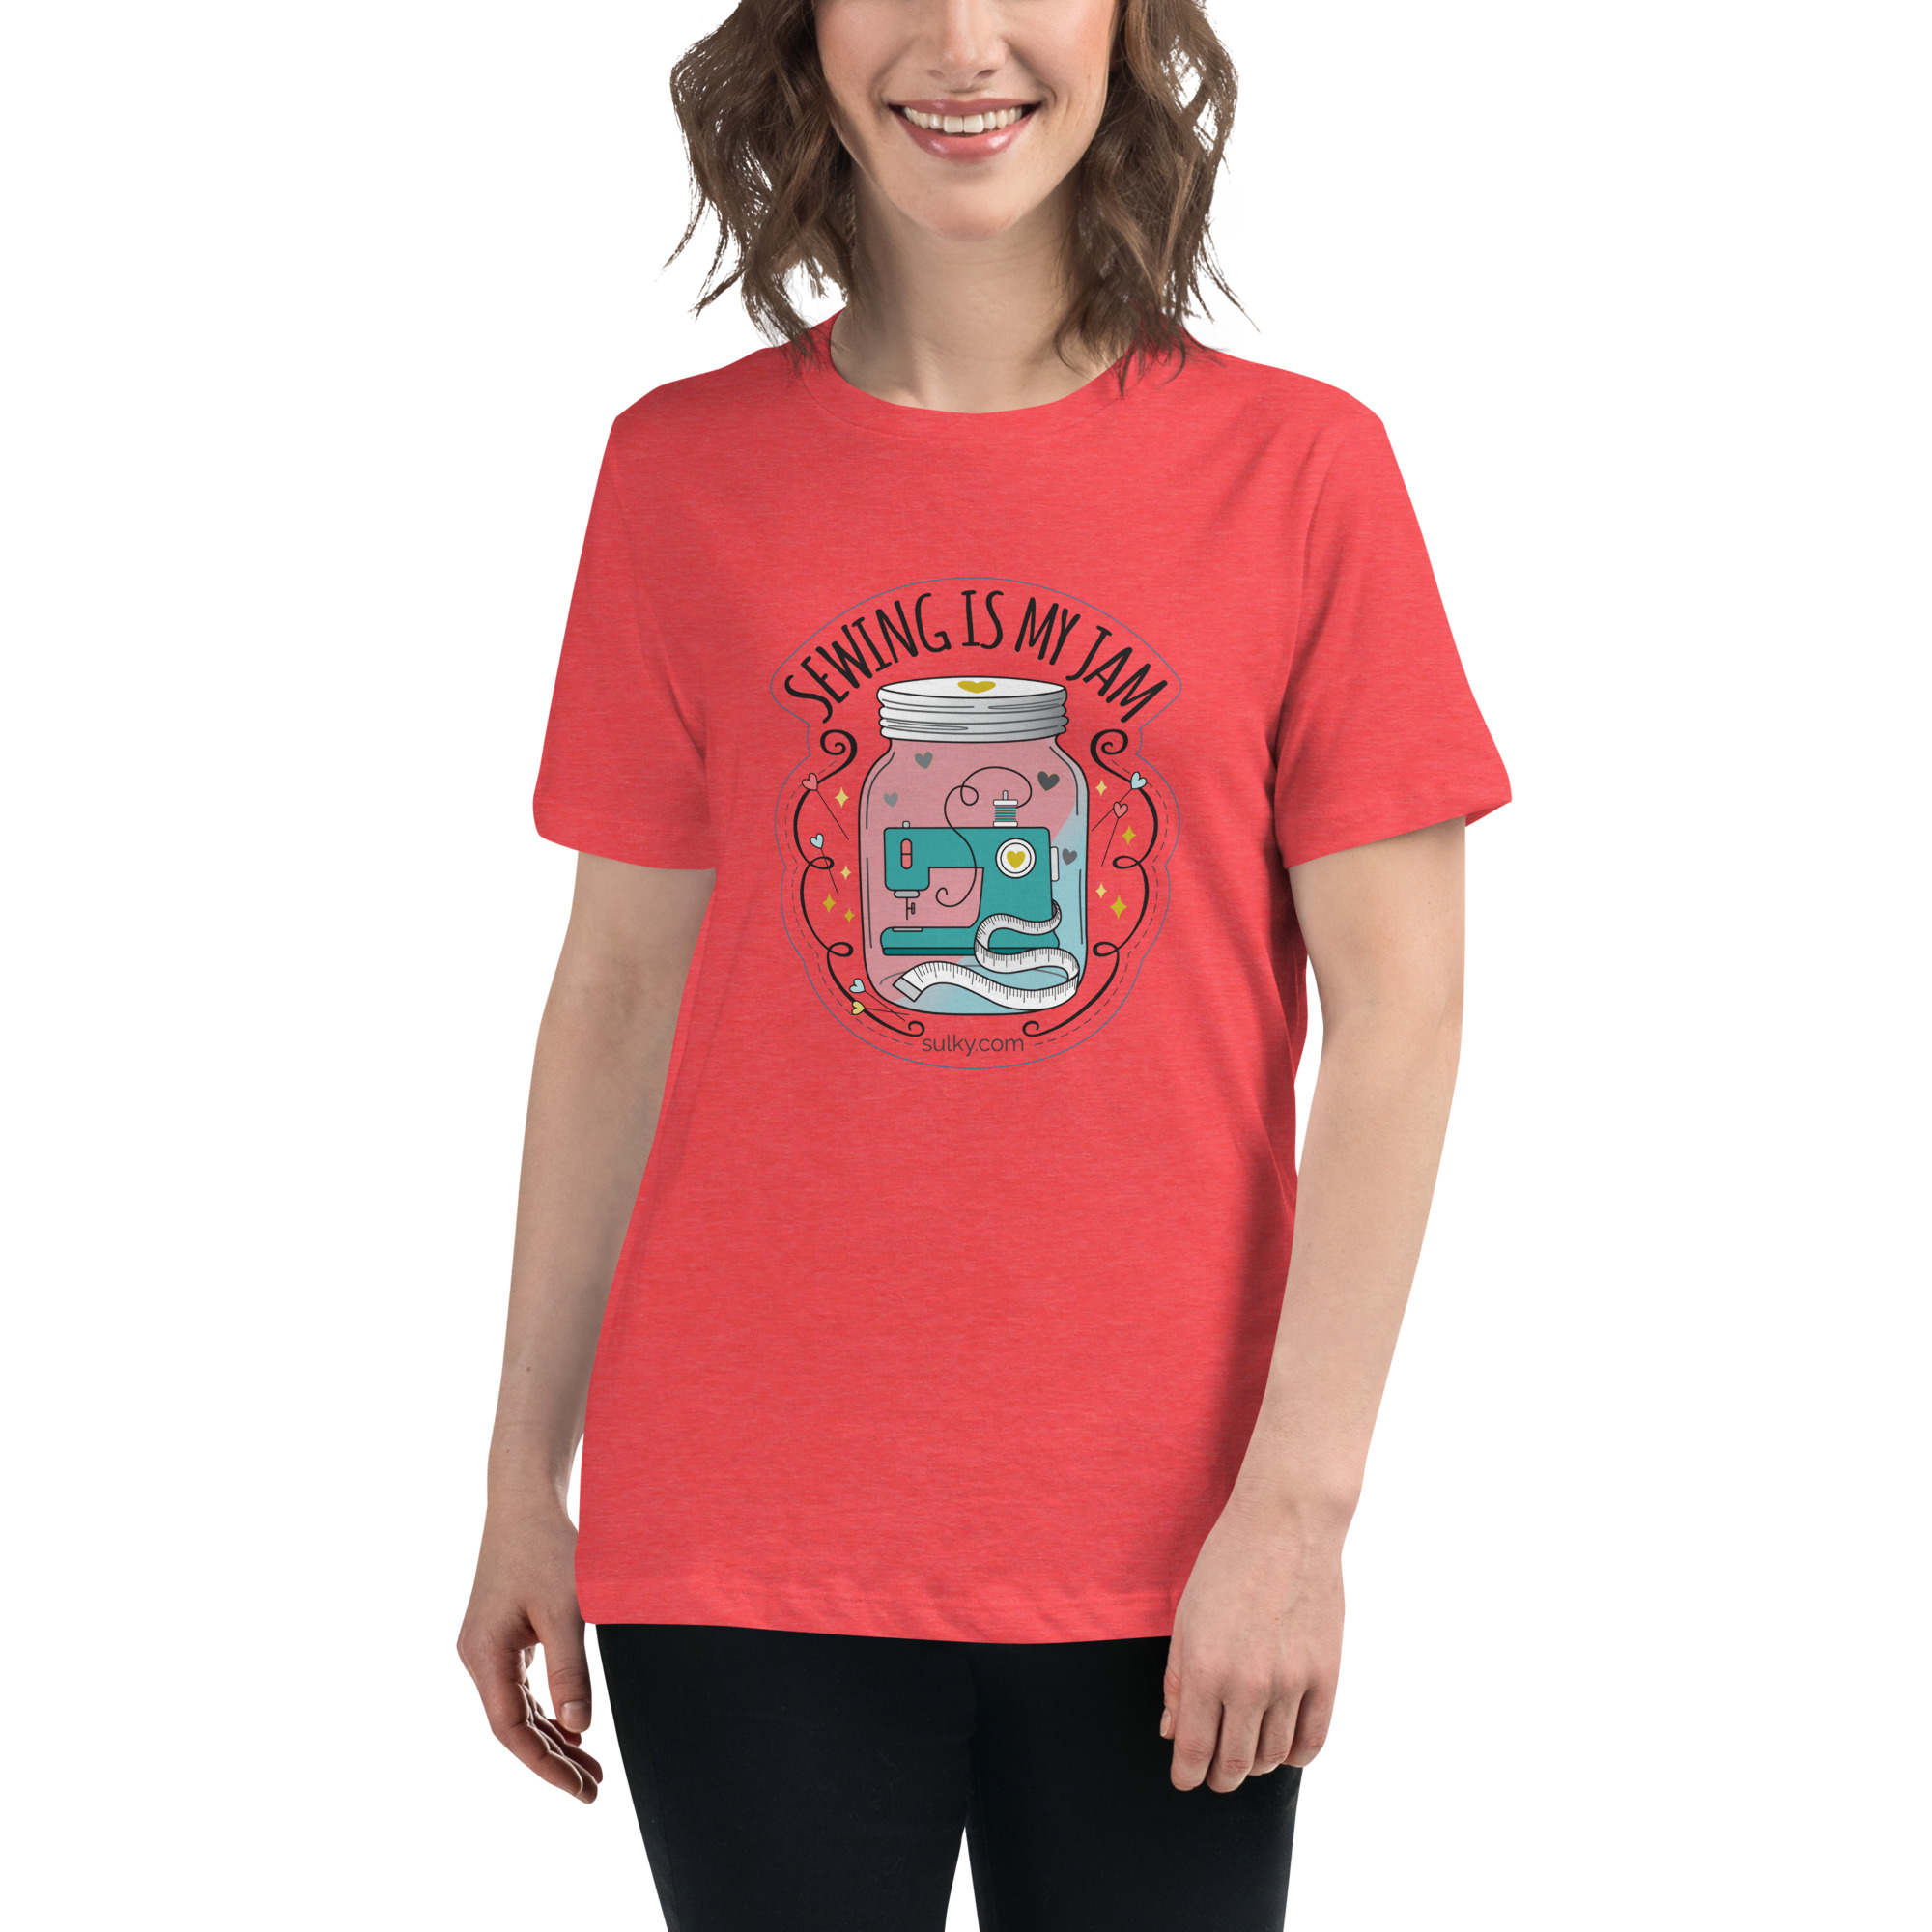 Women's Relaxed T-Shirt - Sewing is My Jam Questions & Answers